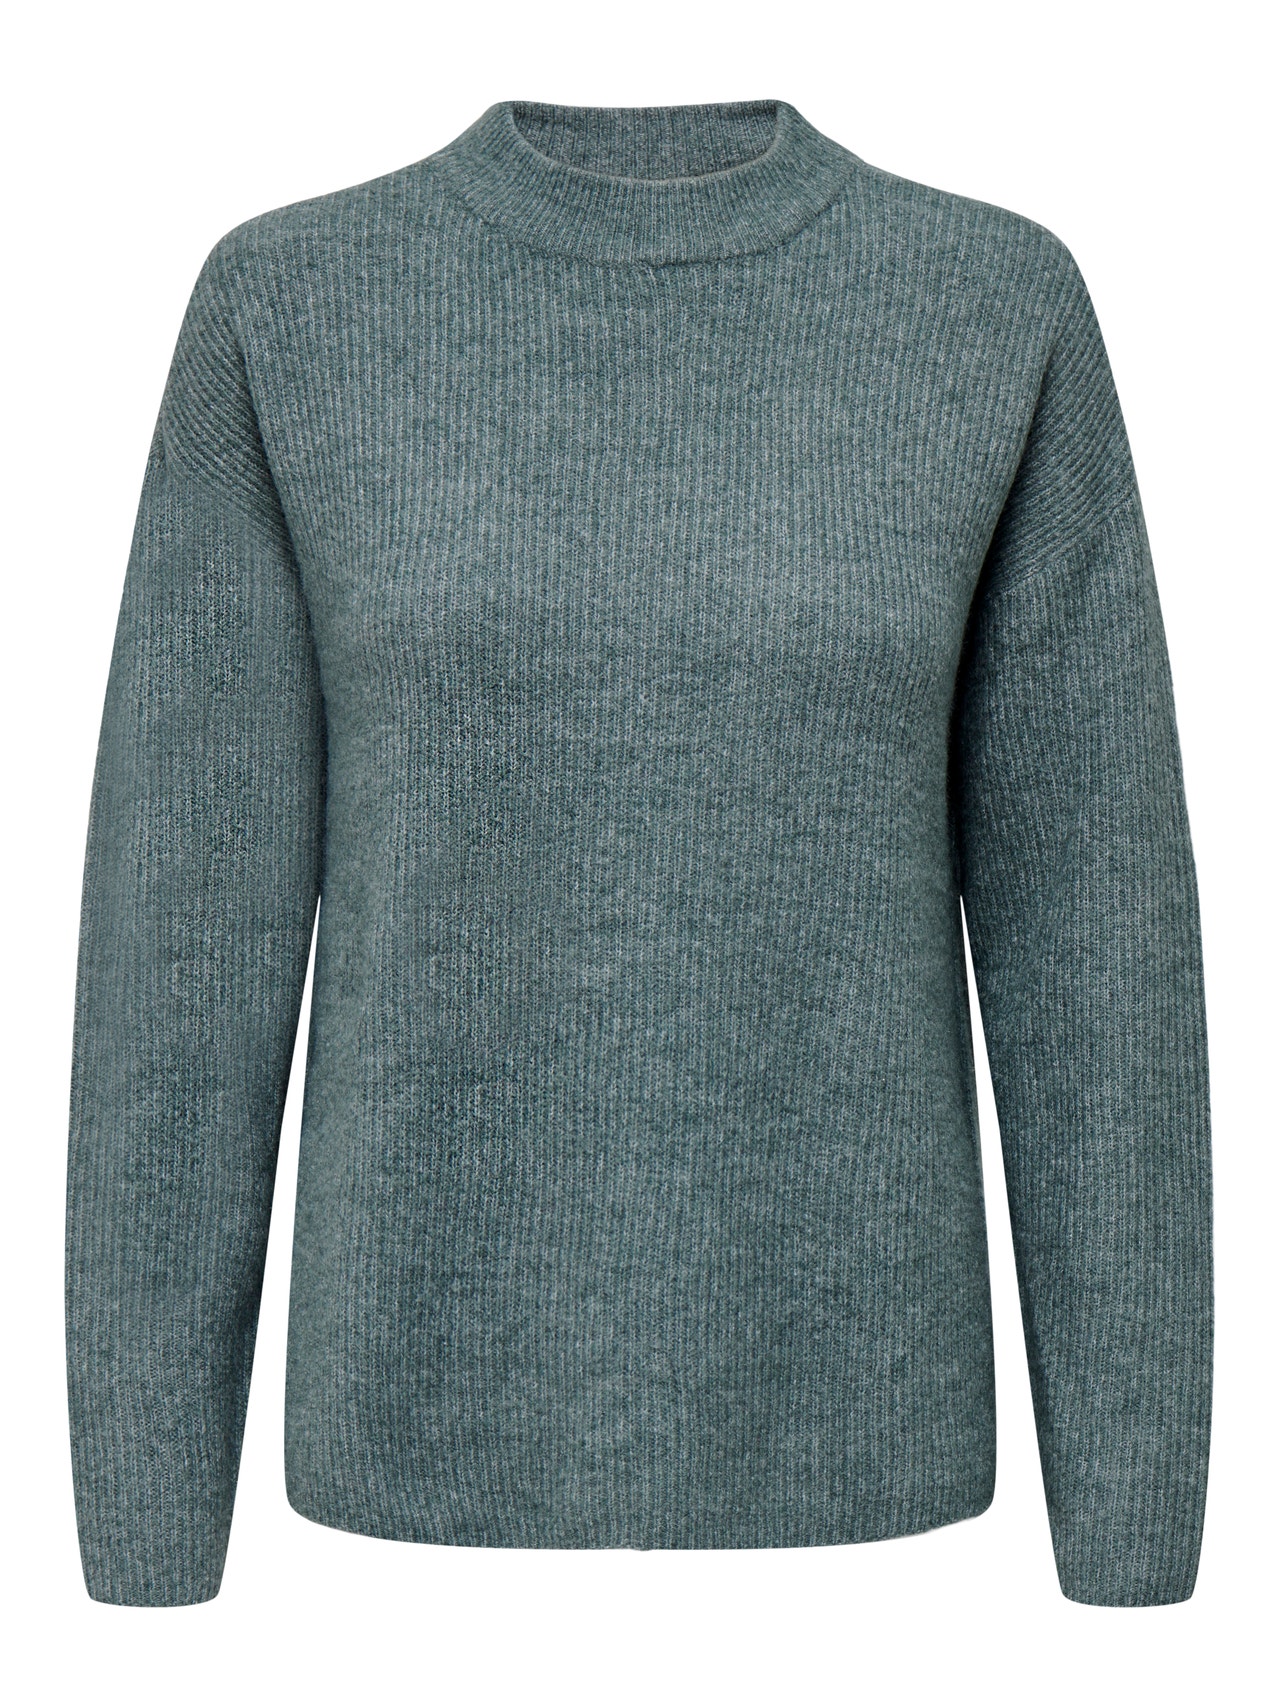 ONLY High neck knitted pullover -Balsam Green - 15277080